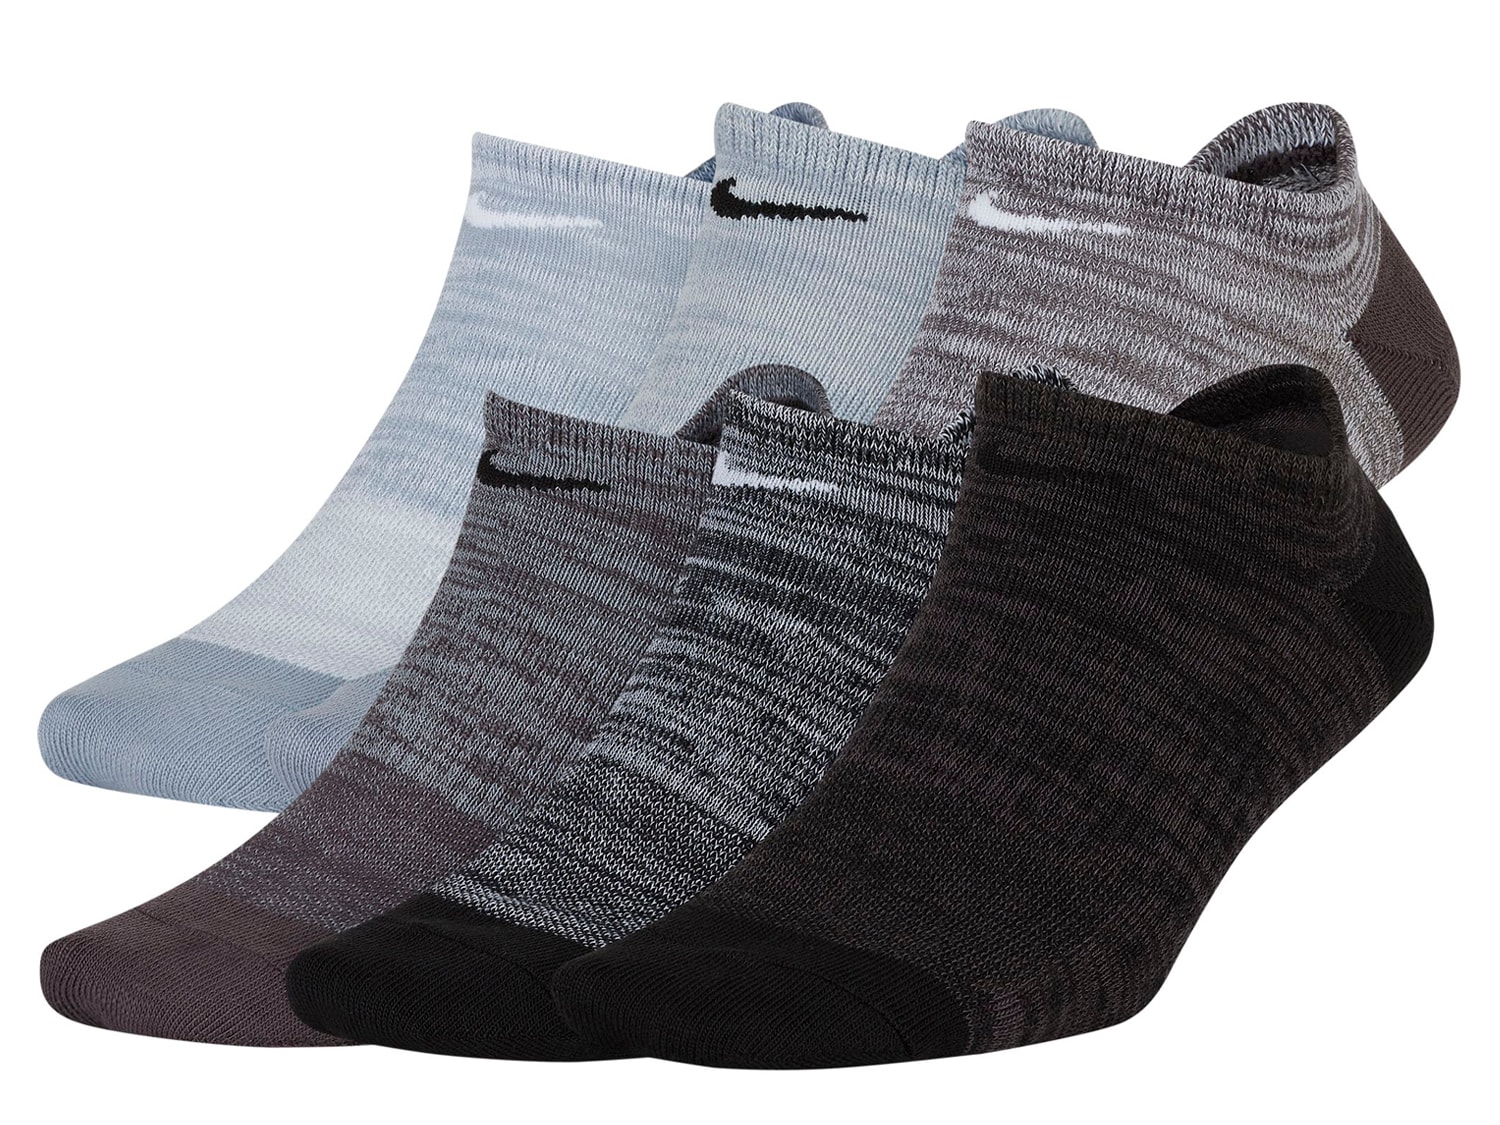 Nike Everyday Women's No Show Socks - 6 Pack - Free Shipping | DSW